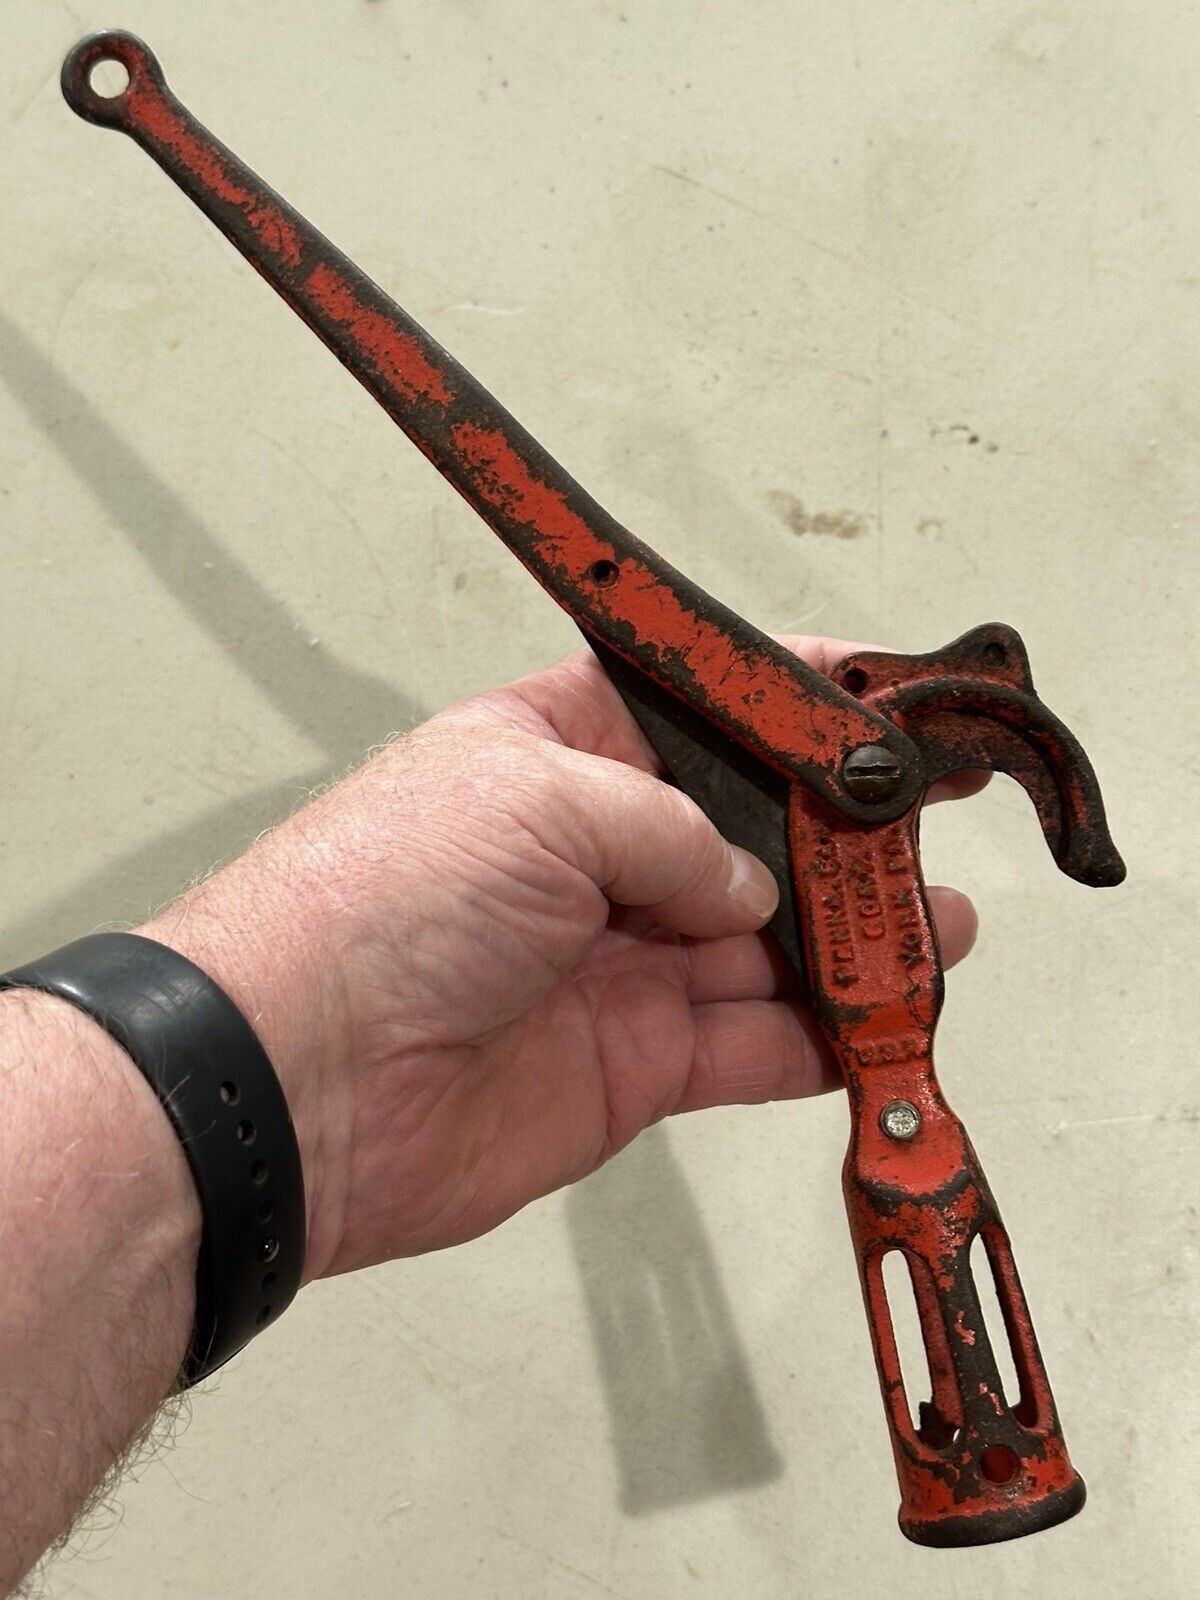 AWESOME VINTAGE PENNA SAW CO. CAST IRON POLE PRUNER CUTTER HEAD - USA MADE